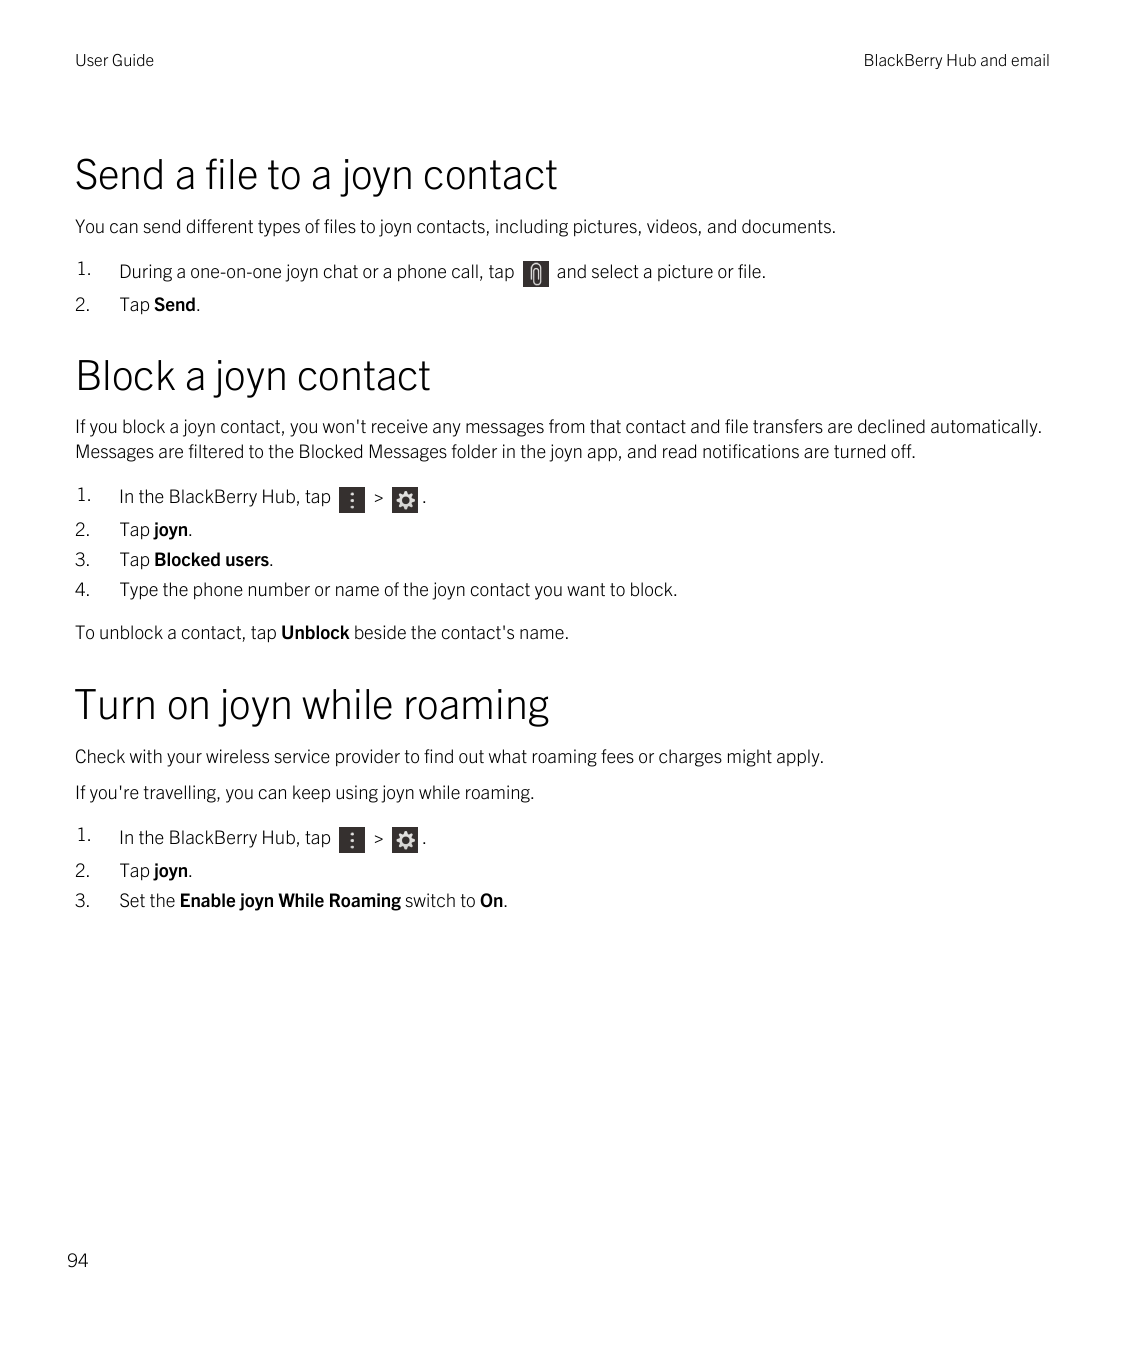 User GuideBlackBerry Hub and emailSend a file to a joyn contactYou can send different types of files to joyn contacts, including